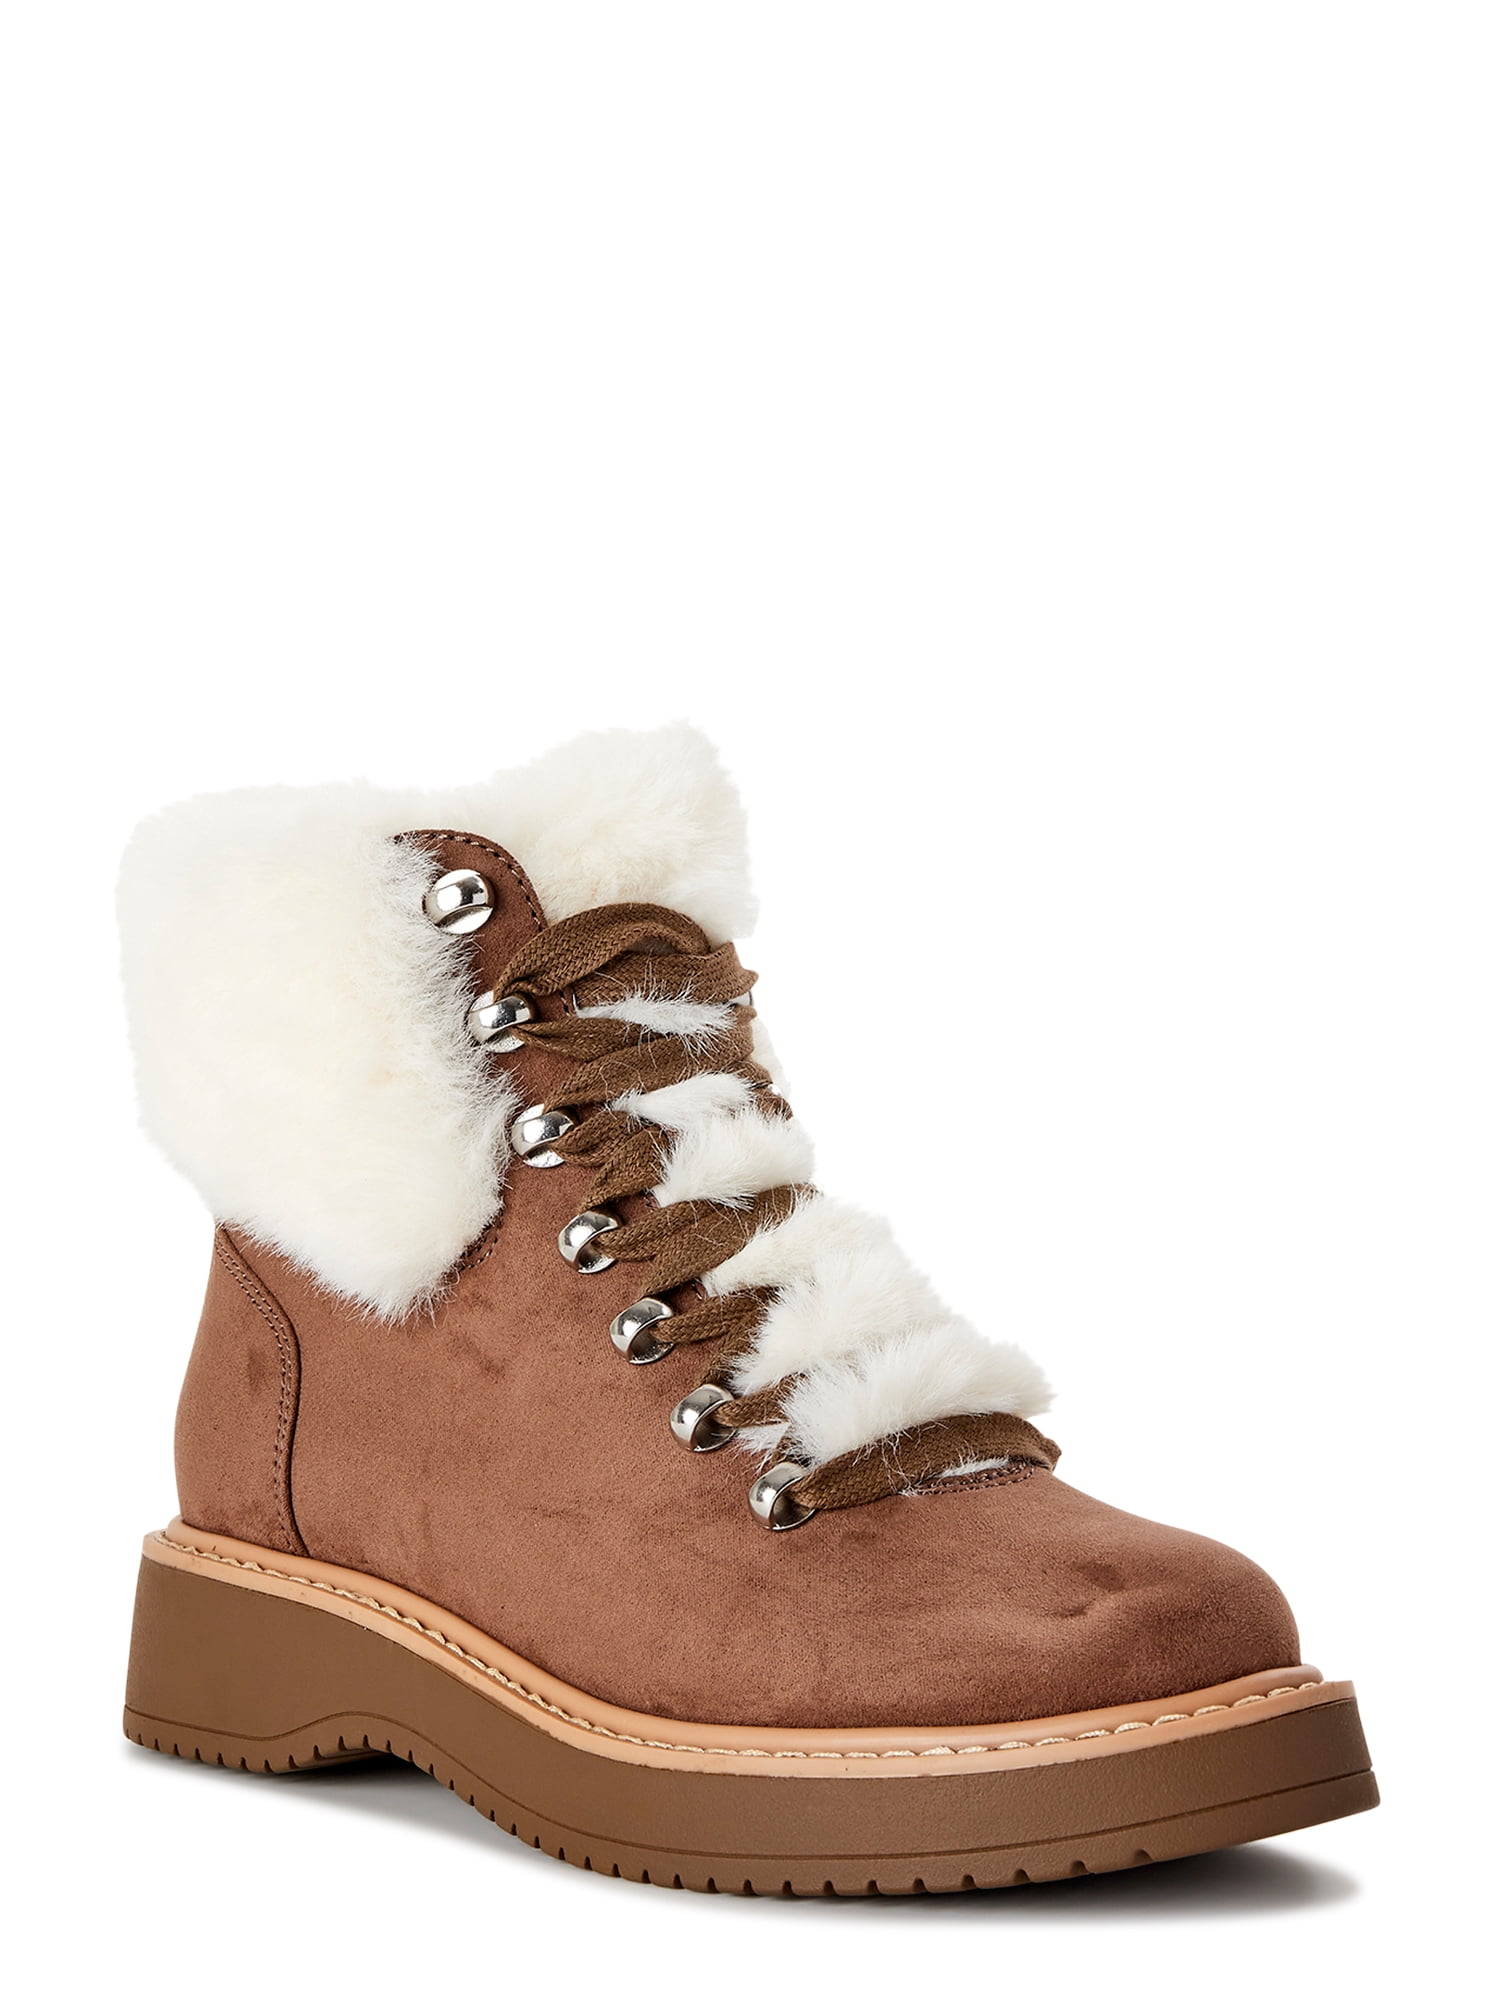 Madden NYC Women's Faux Fur Cuff Lace Up Booties - Walmart.com